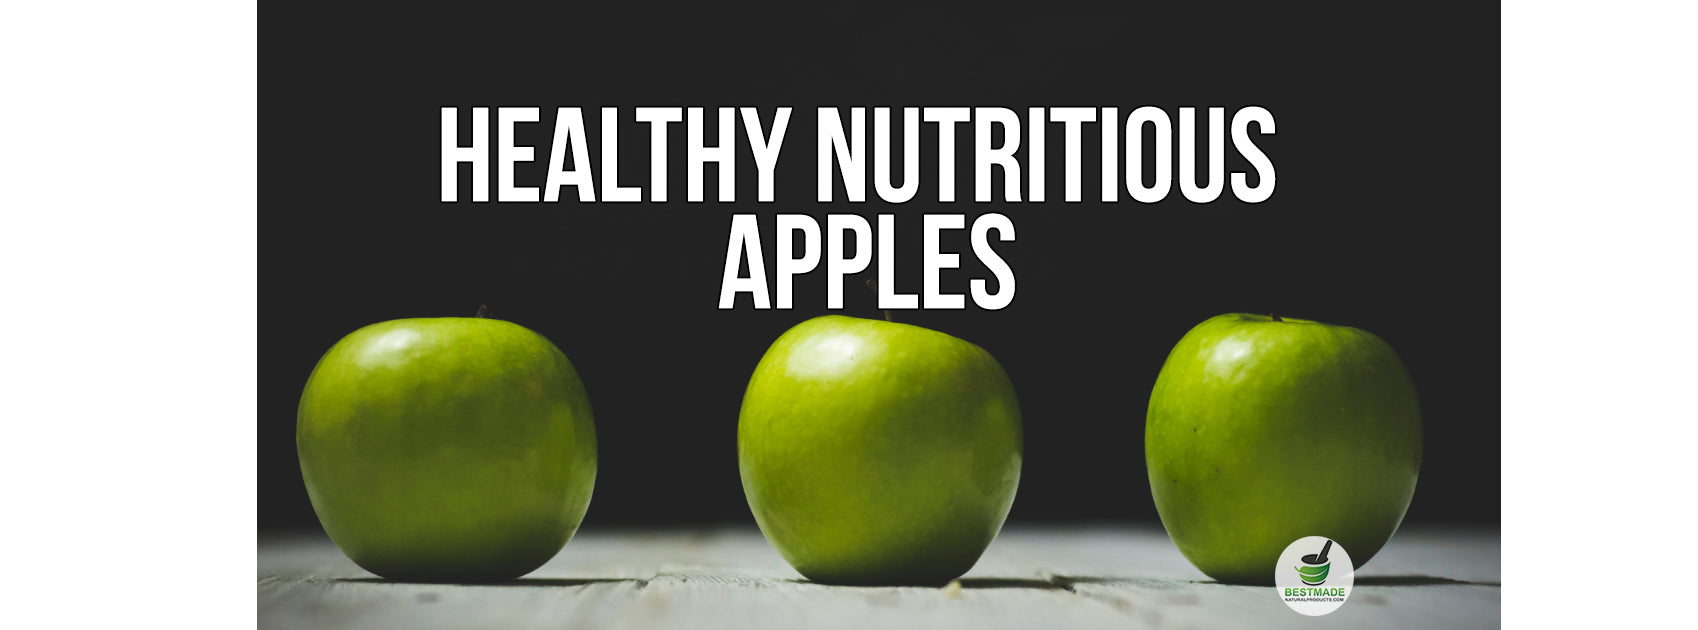 Apples - Crunch Your Way to Healthy Nutrition